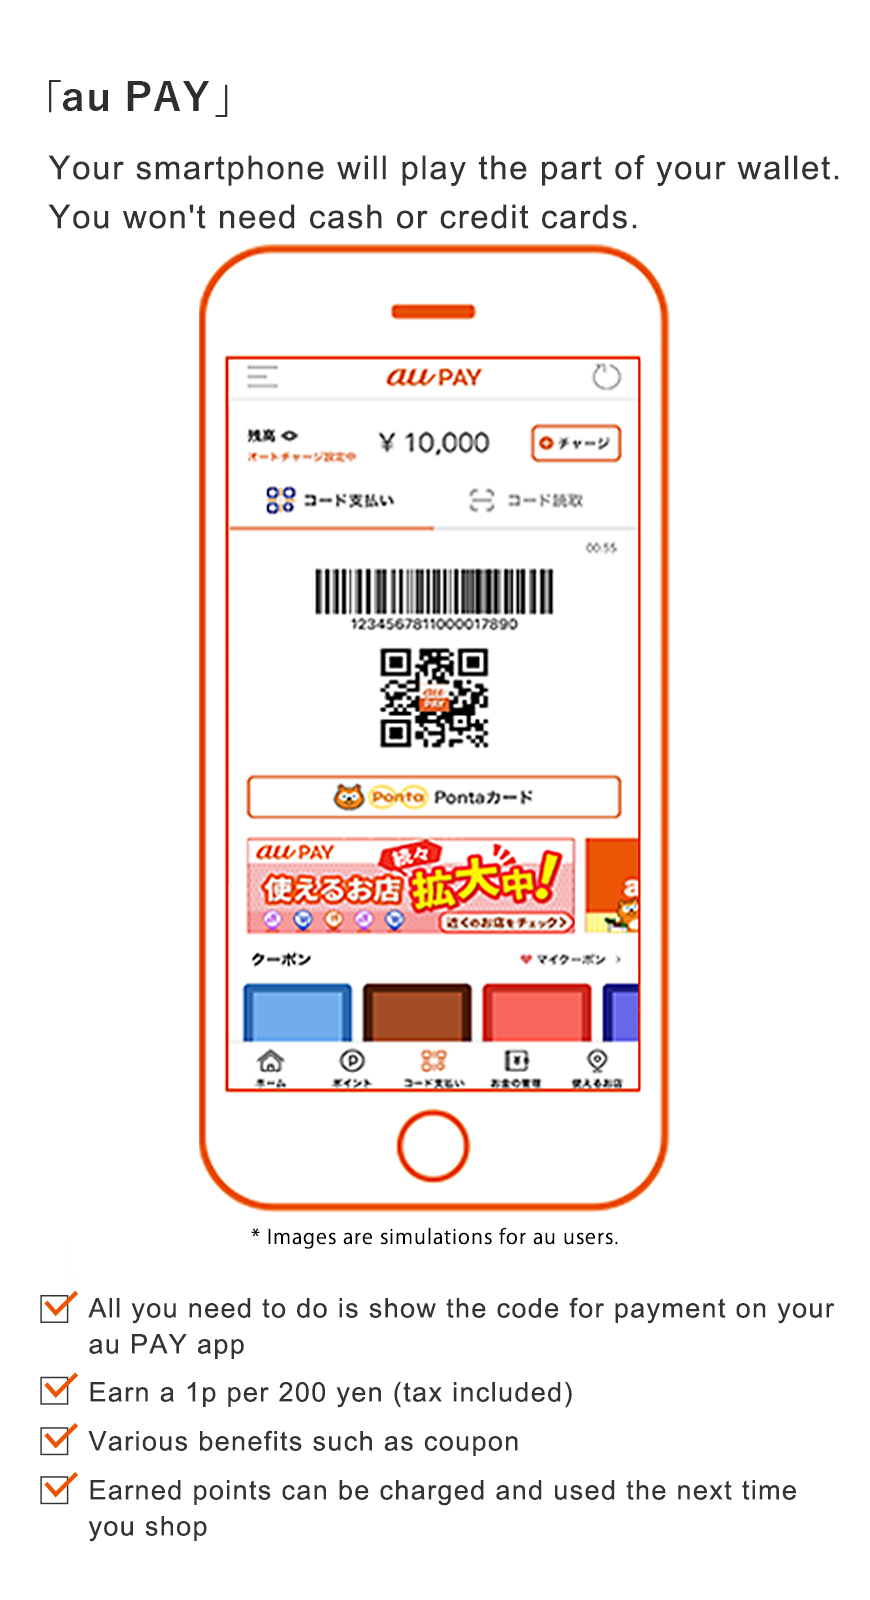 「au PAY」 Your smartphone will play the part of your wallet. You won't need cash or credit cards.